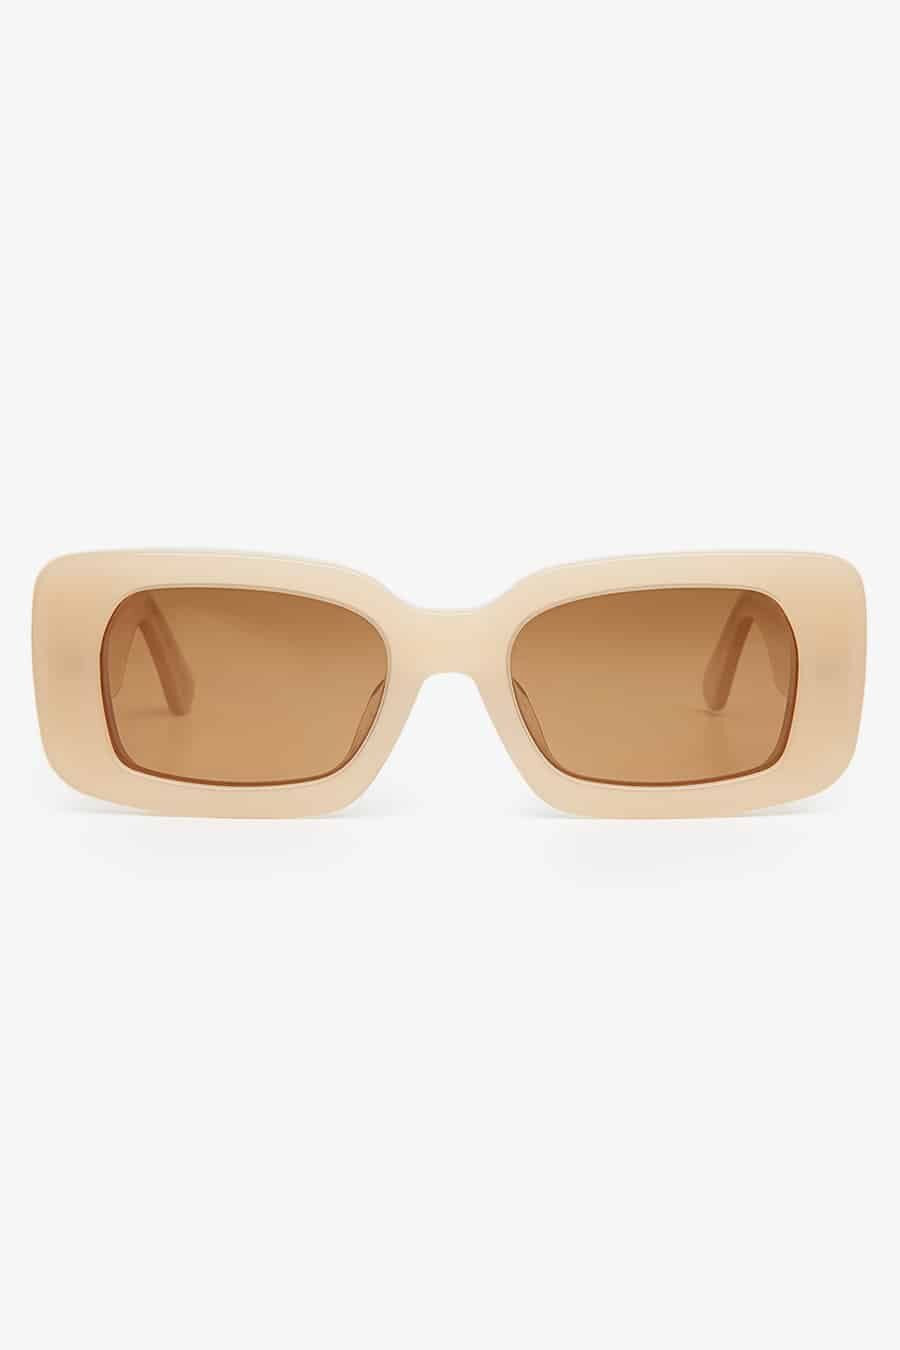 Throw on these oversized square sunnies to be the perfect statement to any outfit. 100% UV protection. Ethically made in Spain.